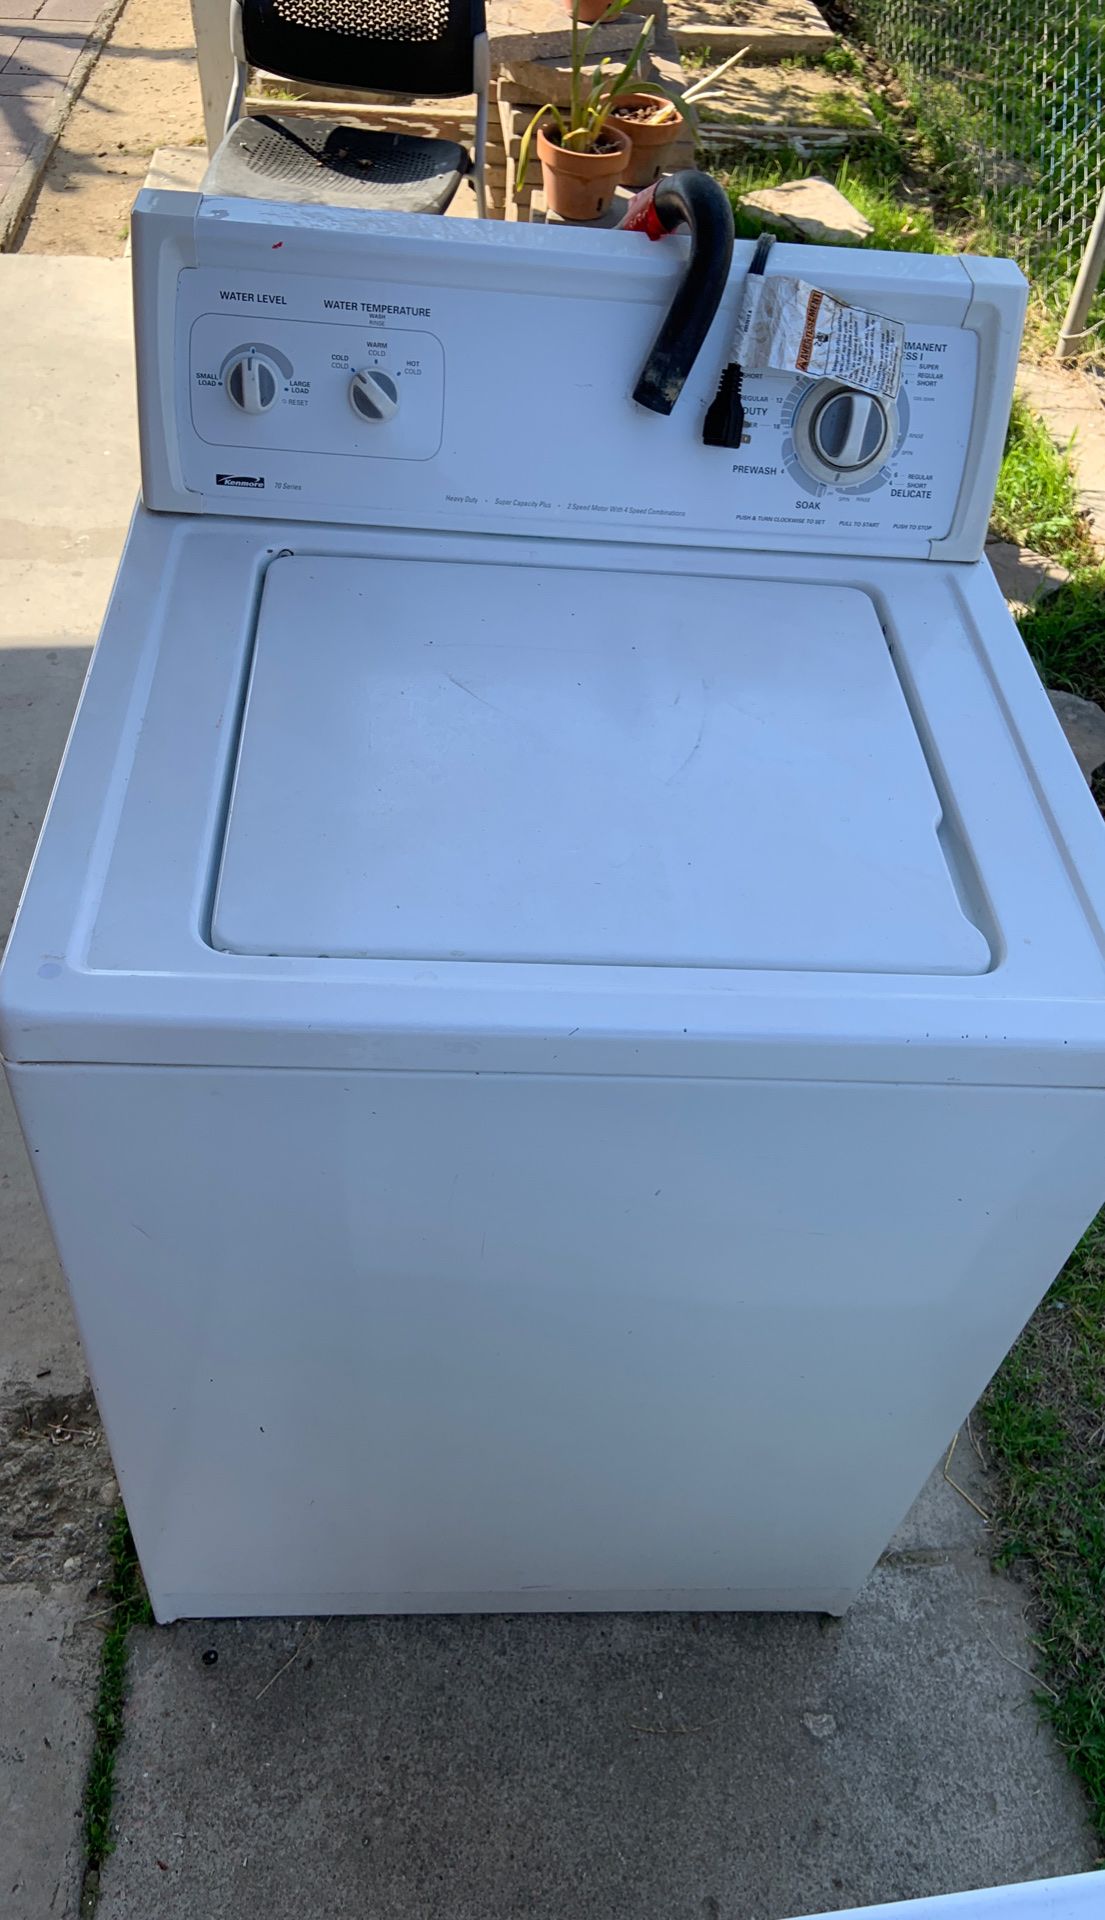 Dryer and washer